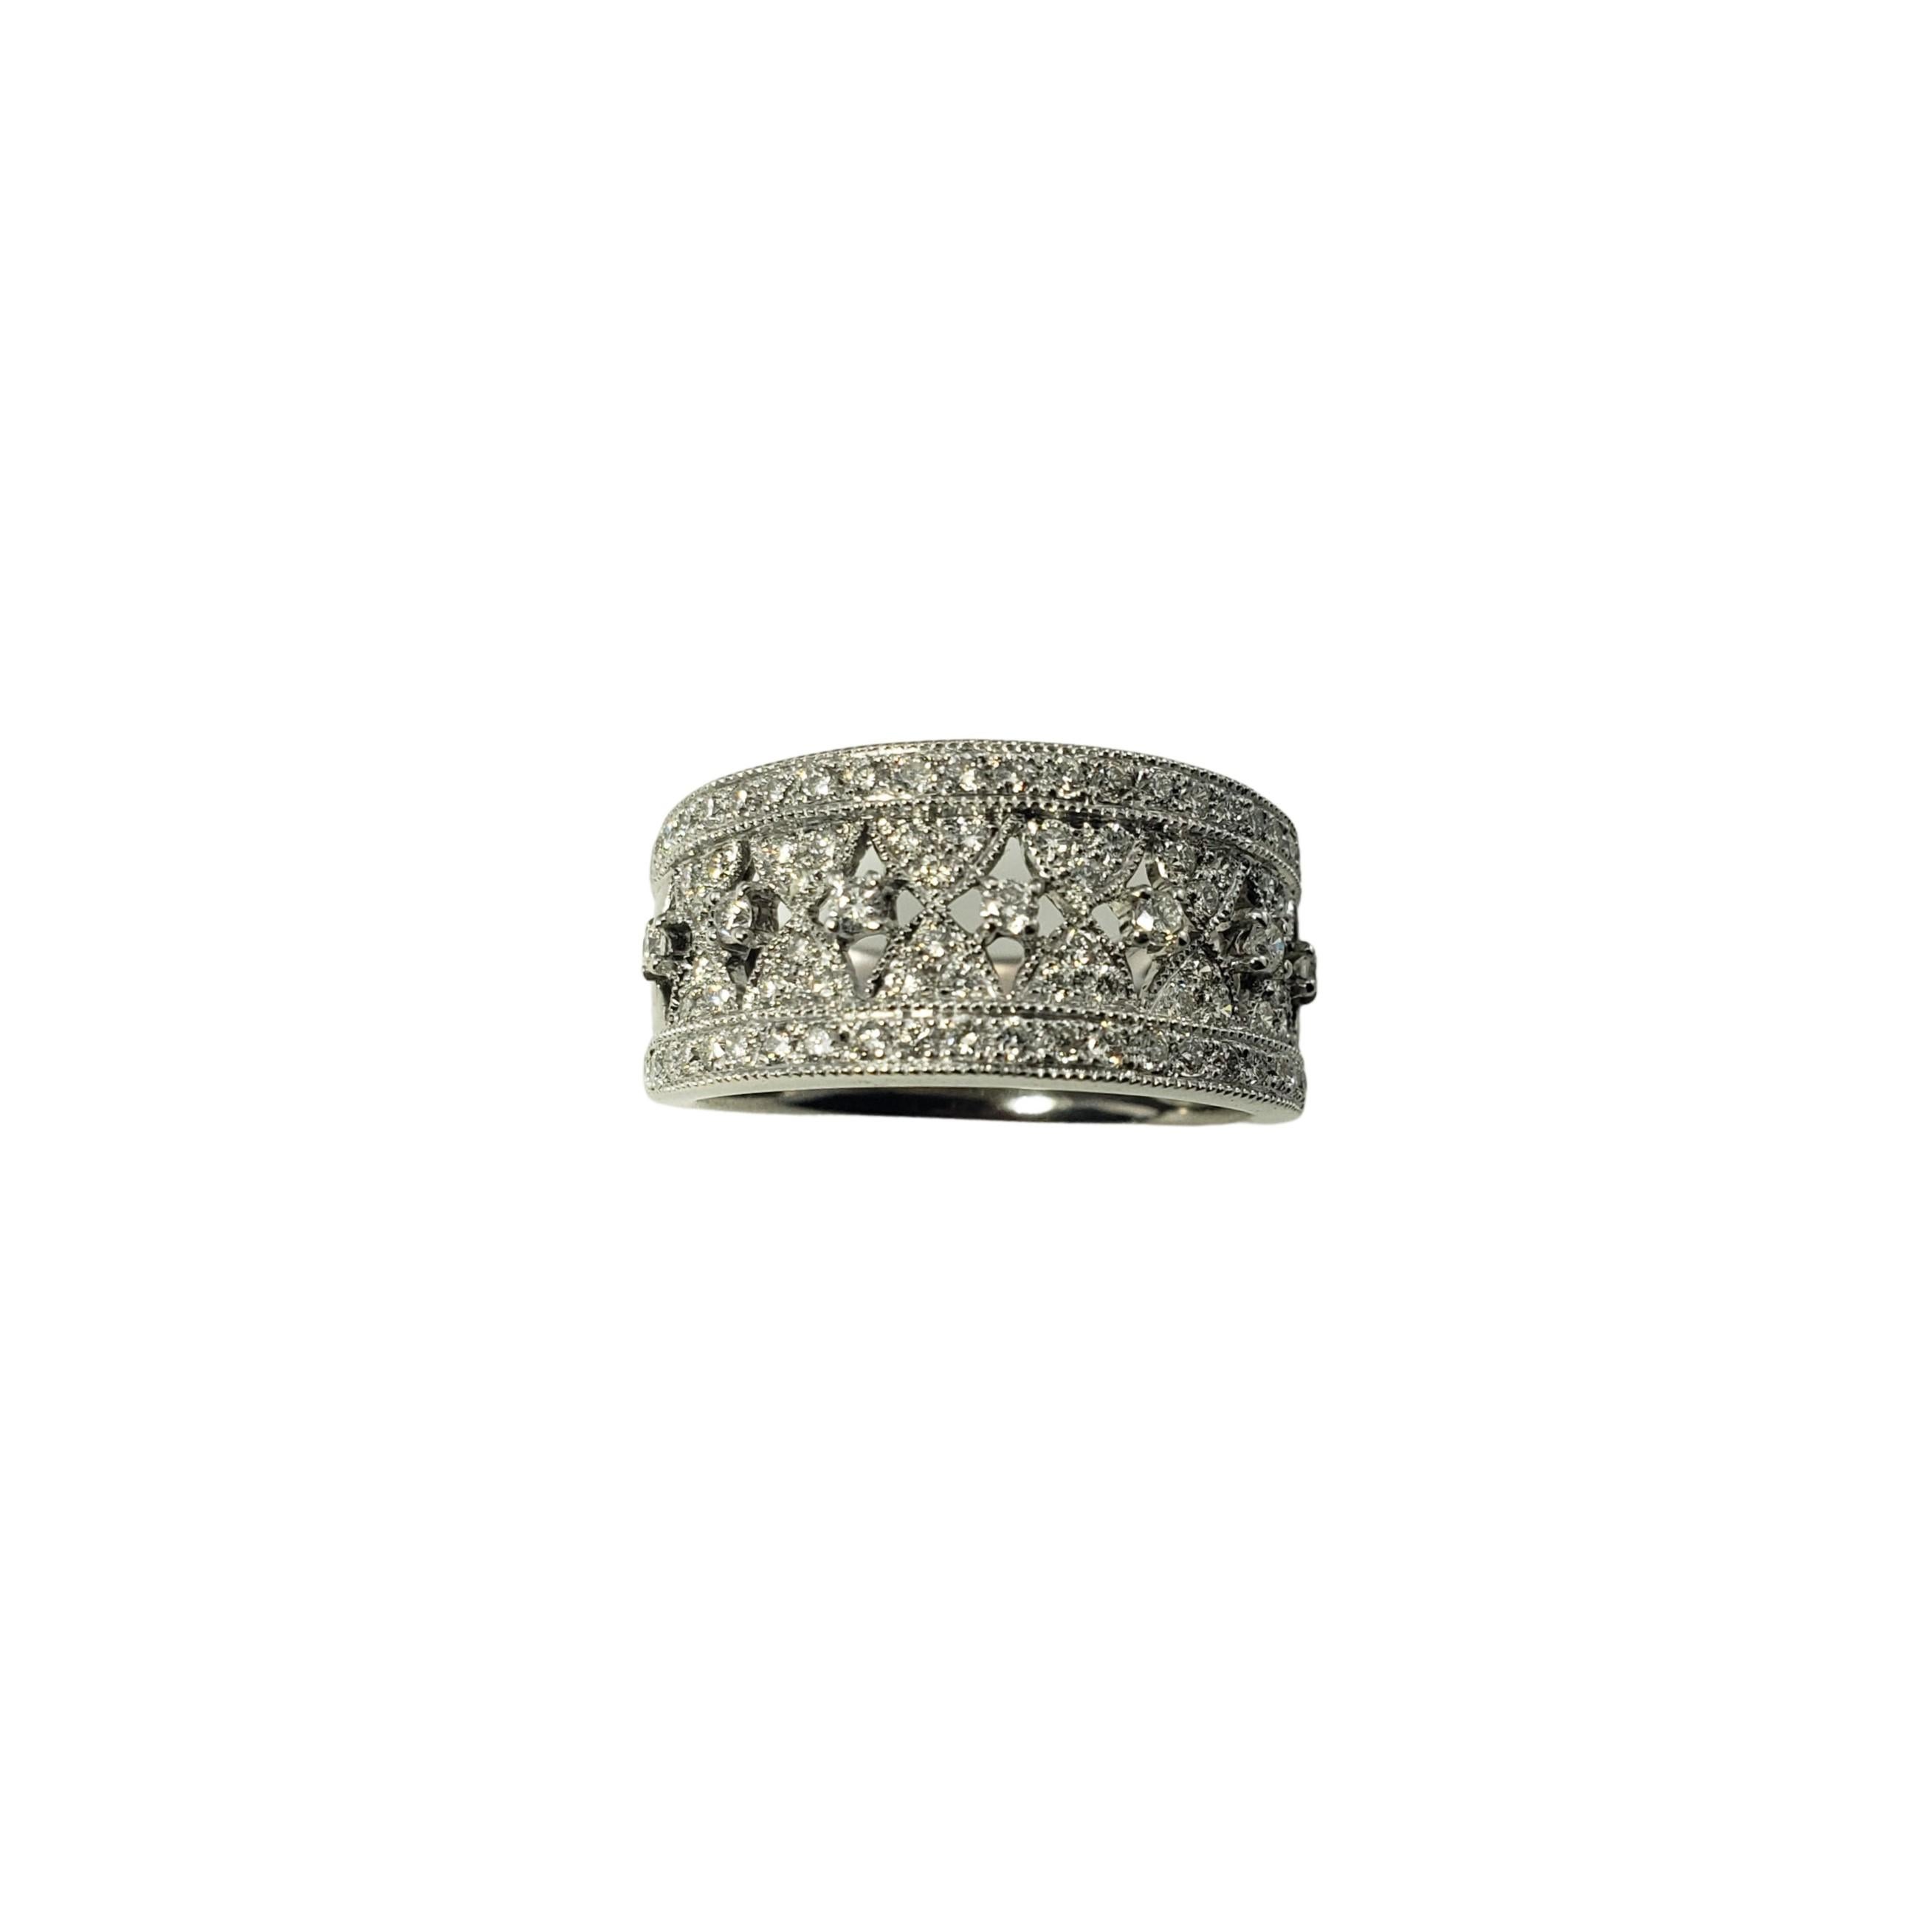 14 Karat White Gold Diamond Band Ring Size 6.5-

This sparkling band features 85 round brilliant cut diamonds set in beautifully detailed 14K white gold.  Width:  9 mm.  Shank:  6 mm.

Approximate total diamond weight:  .70 ct.

Diamond color: 